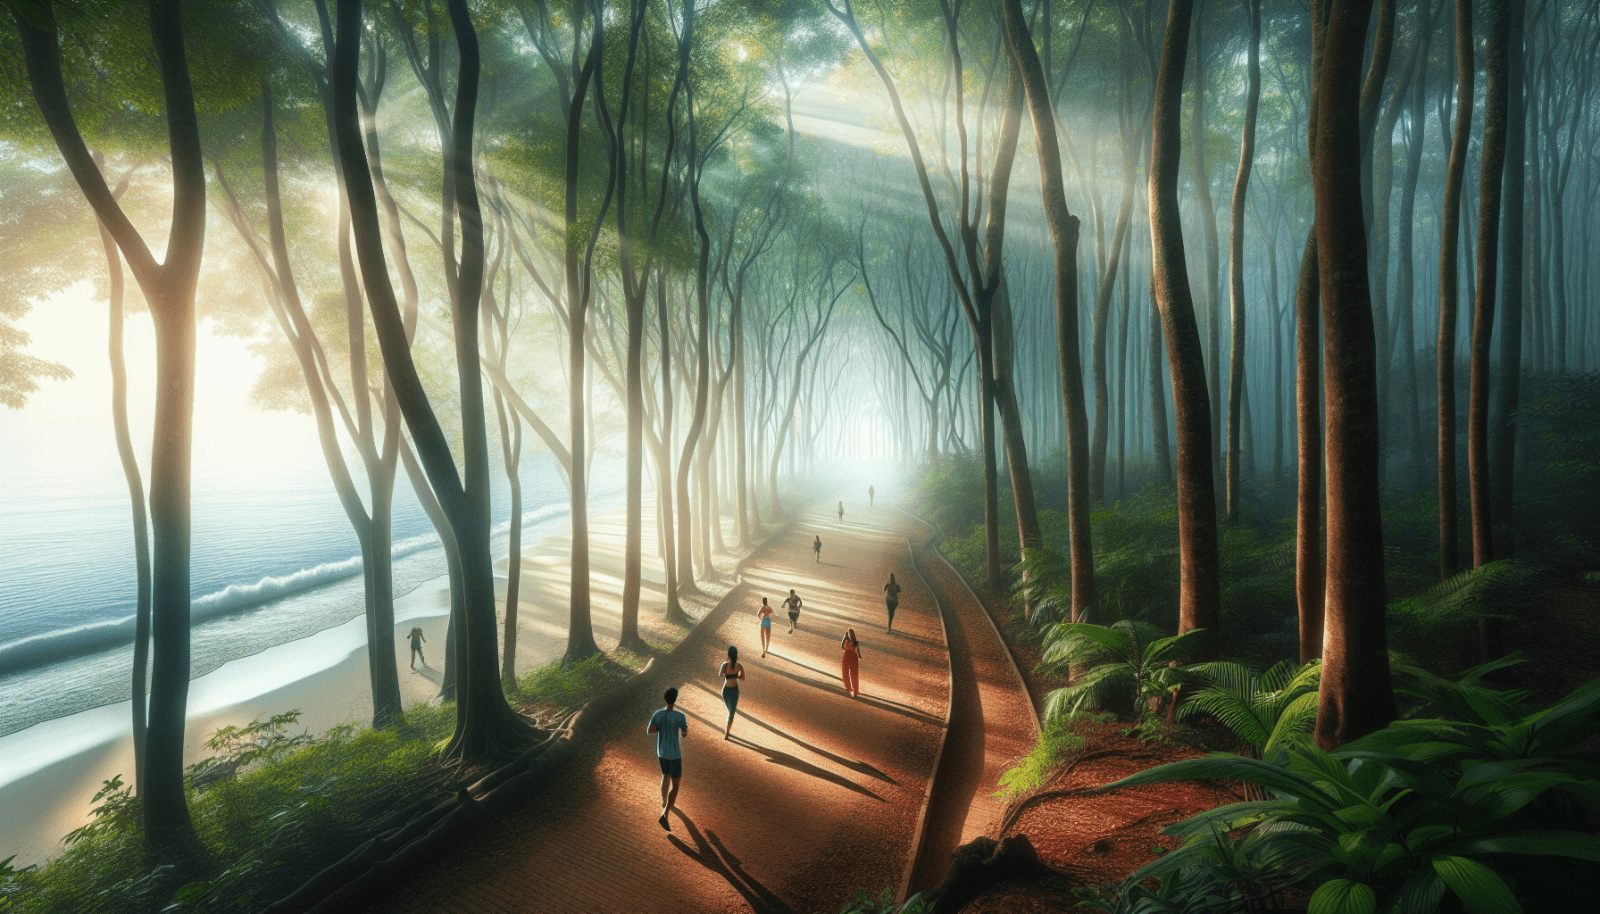 People jogging and walking on a picturesque tree-lined path next to a beach, with sunlight filtering through the misty forest canopy.